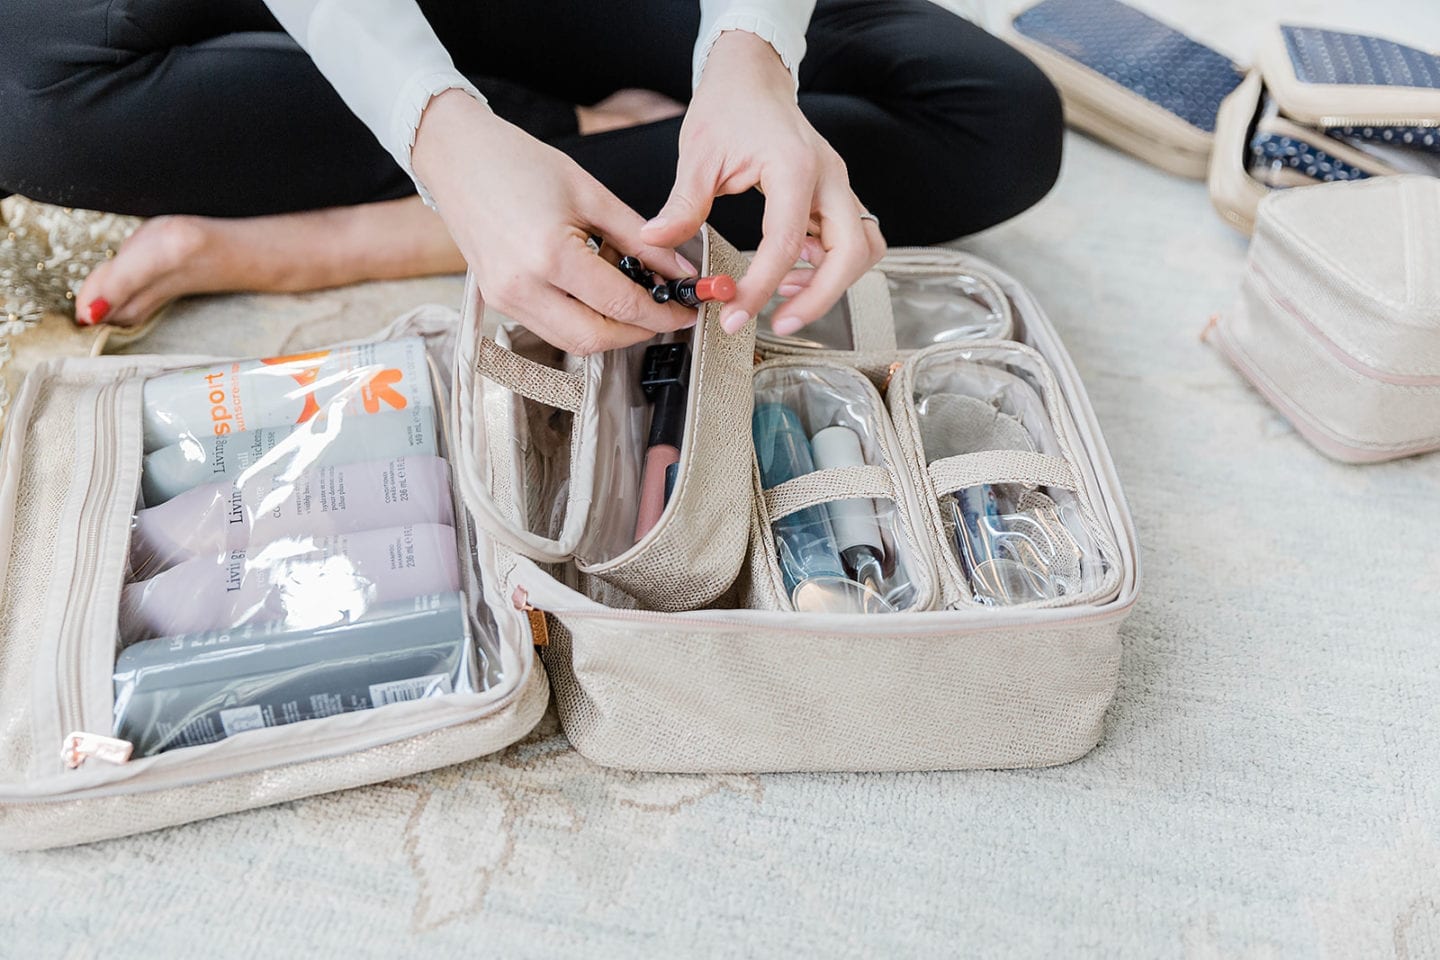 Organizing makeup when you travel so you can see it